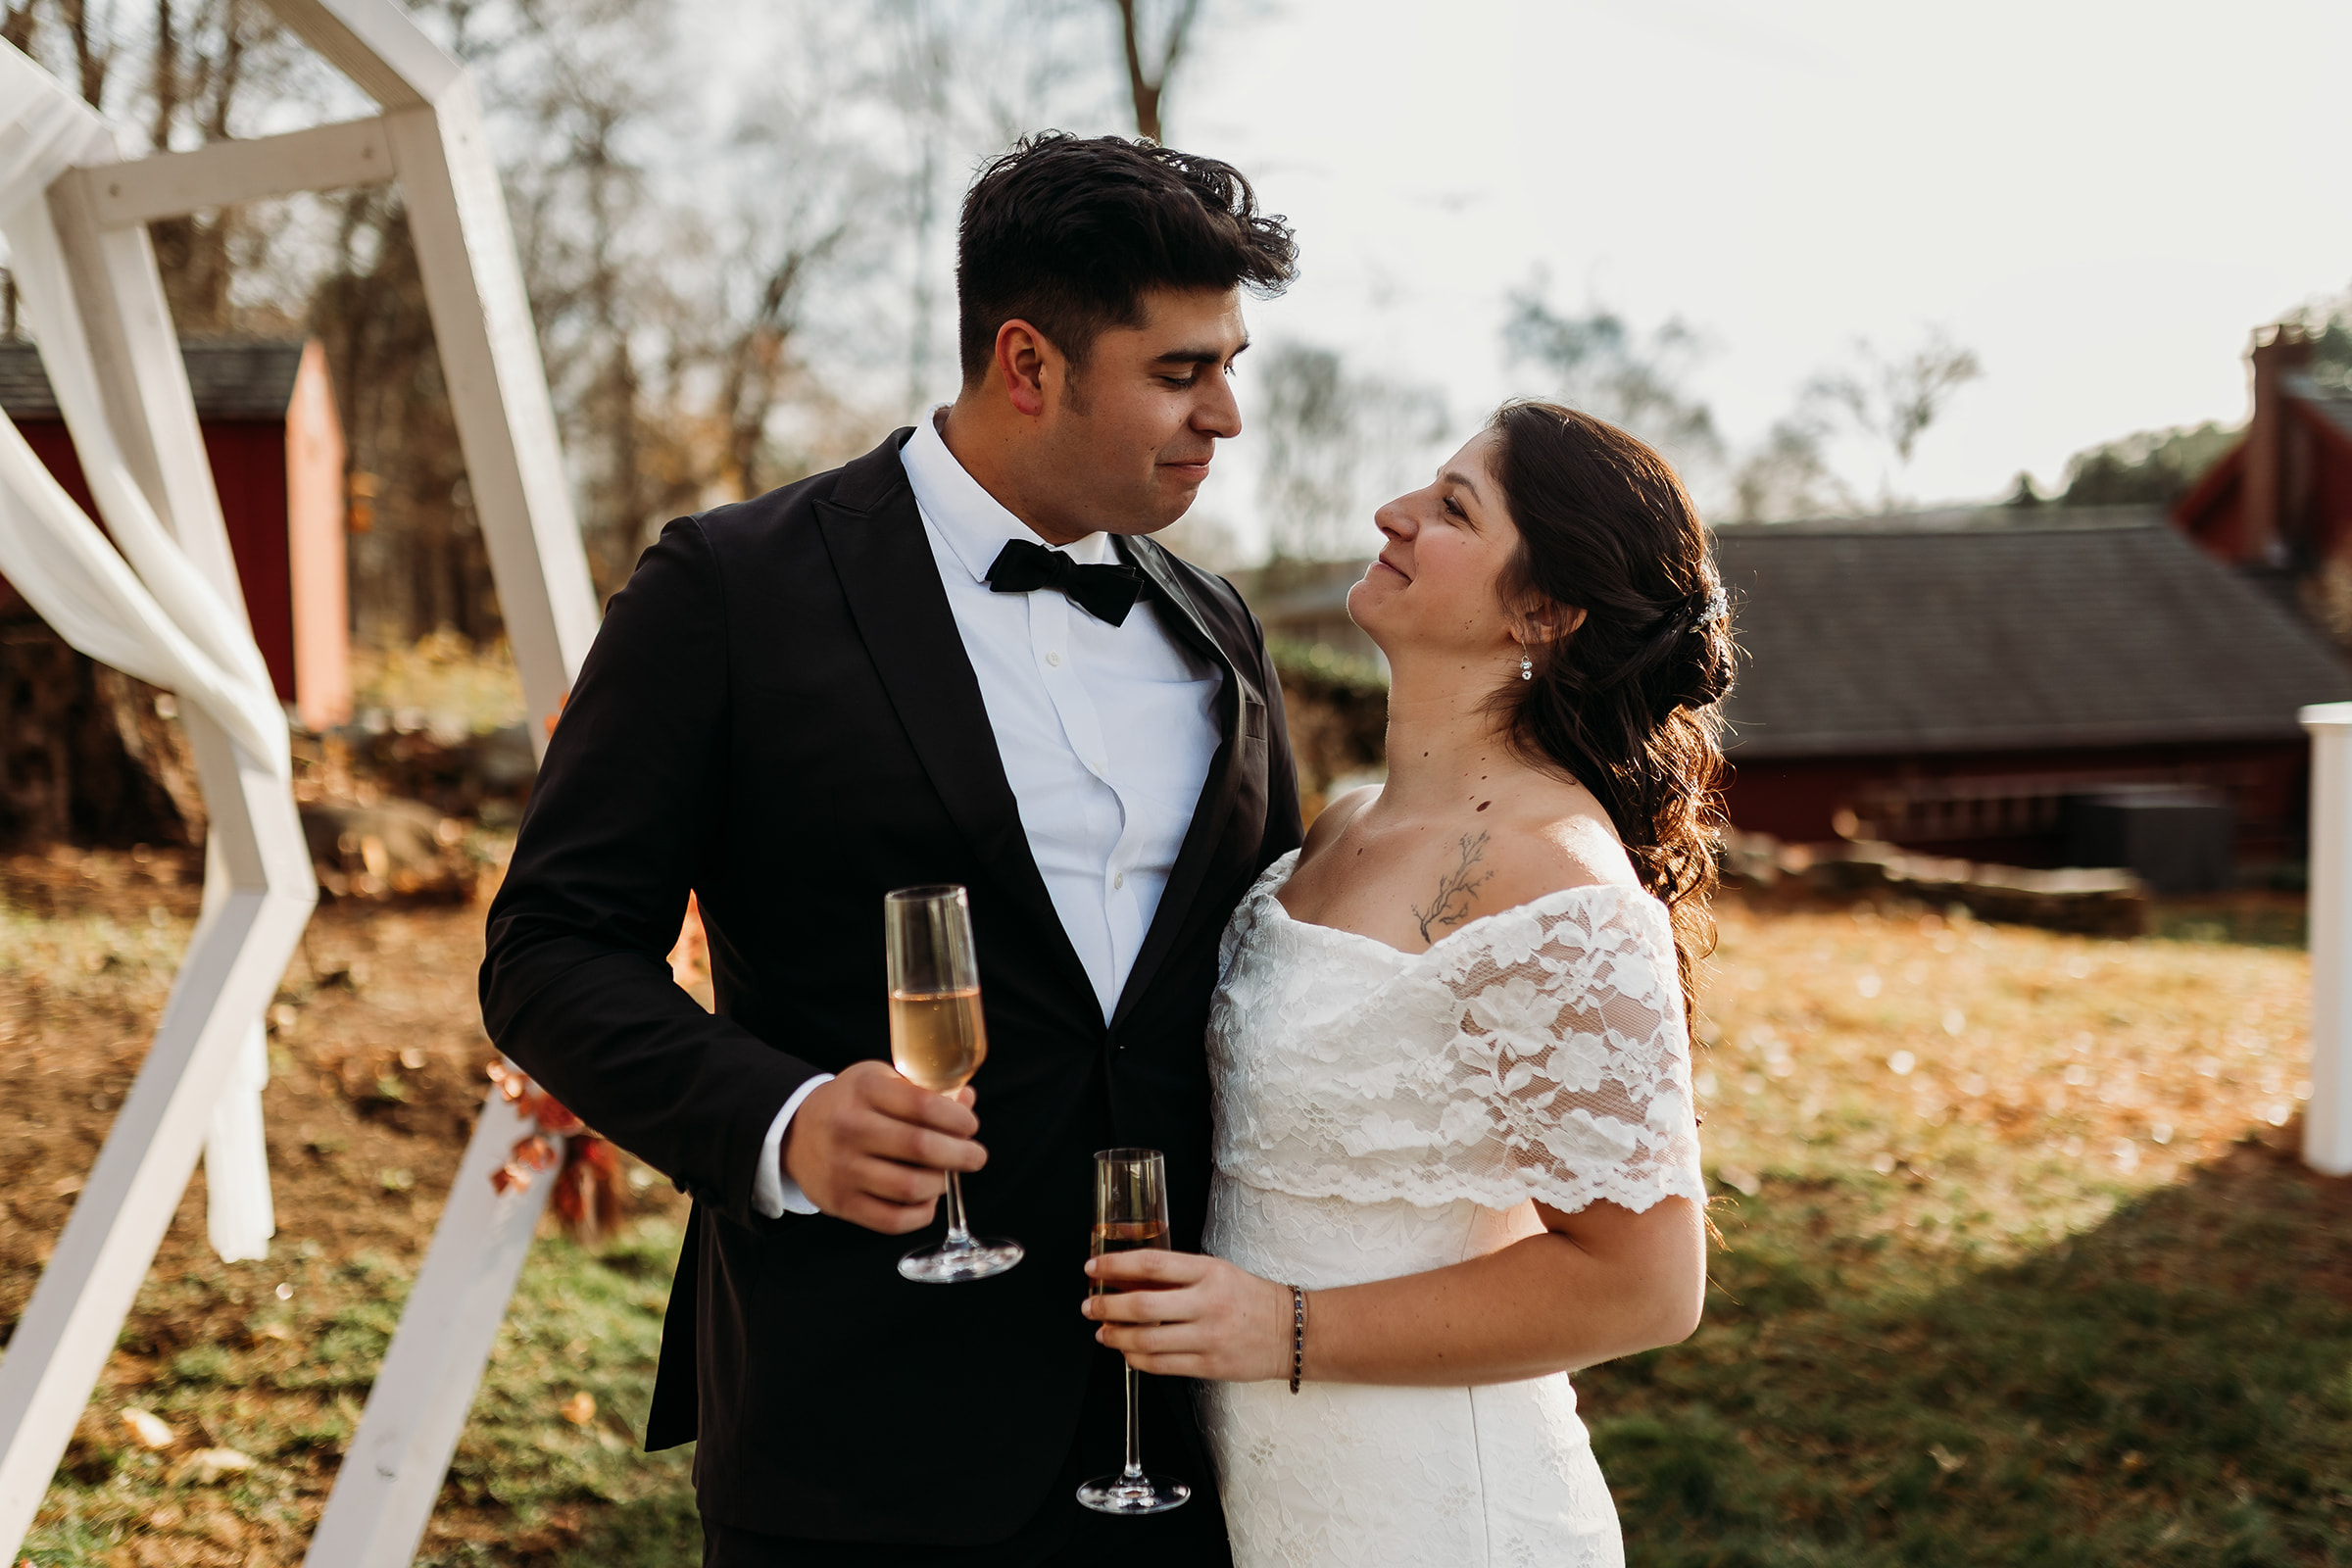 Bride and groom sharing a tender moment during their intimate Connecticut wedding ceremony